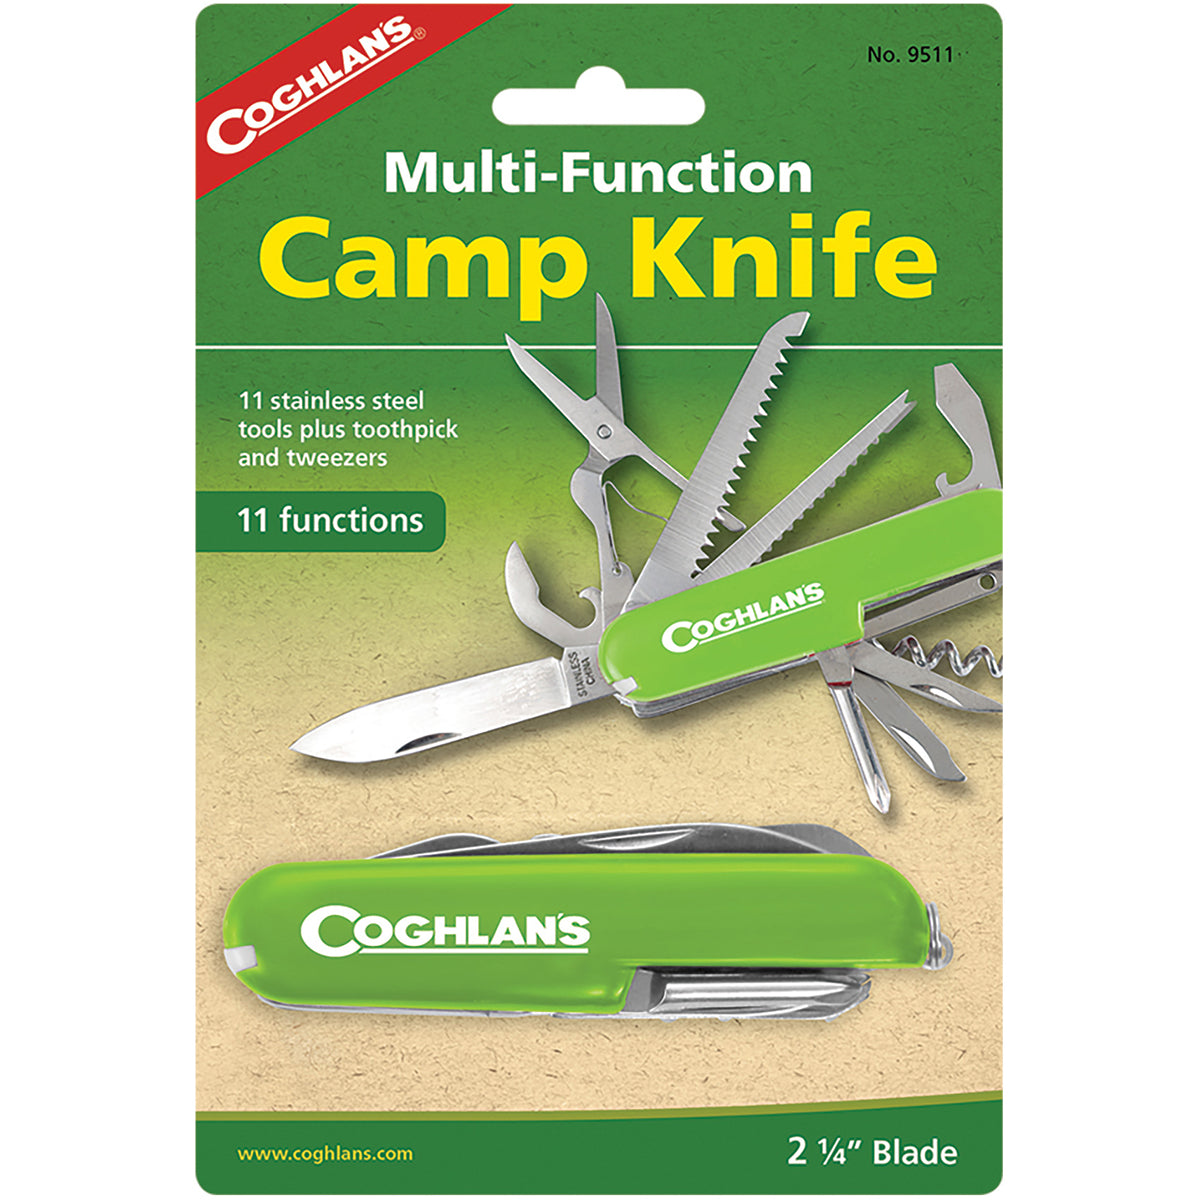 Coghlan's Multi-Function Camp Knife, 11 Functions, Army Camping Swiss Style Coghlan's